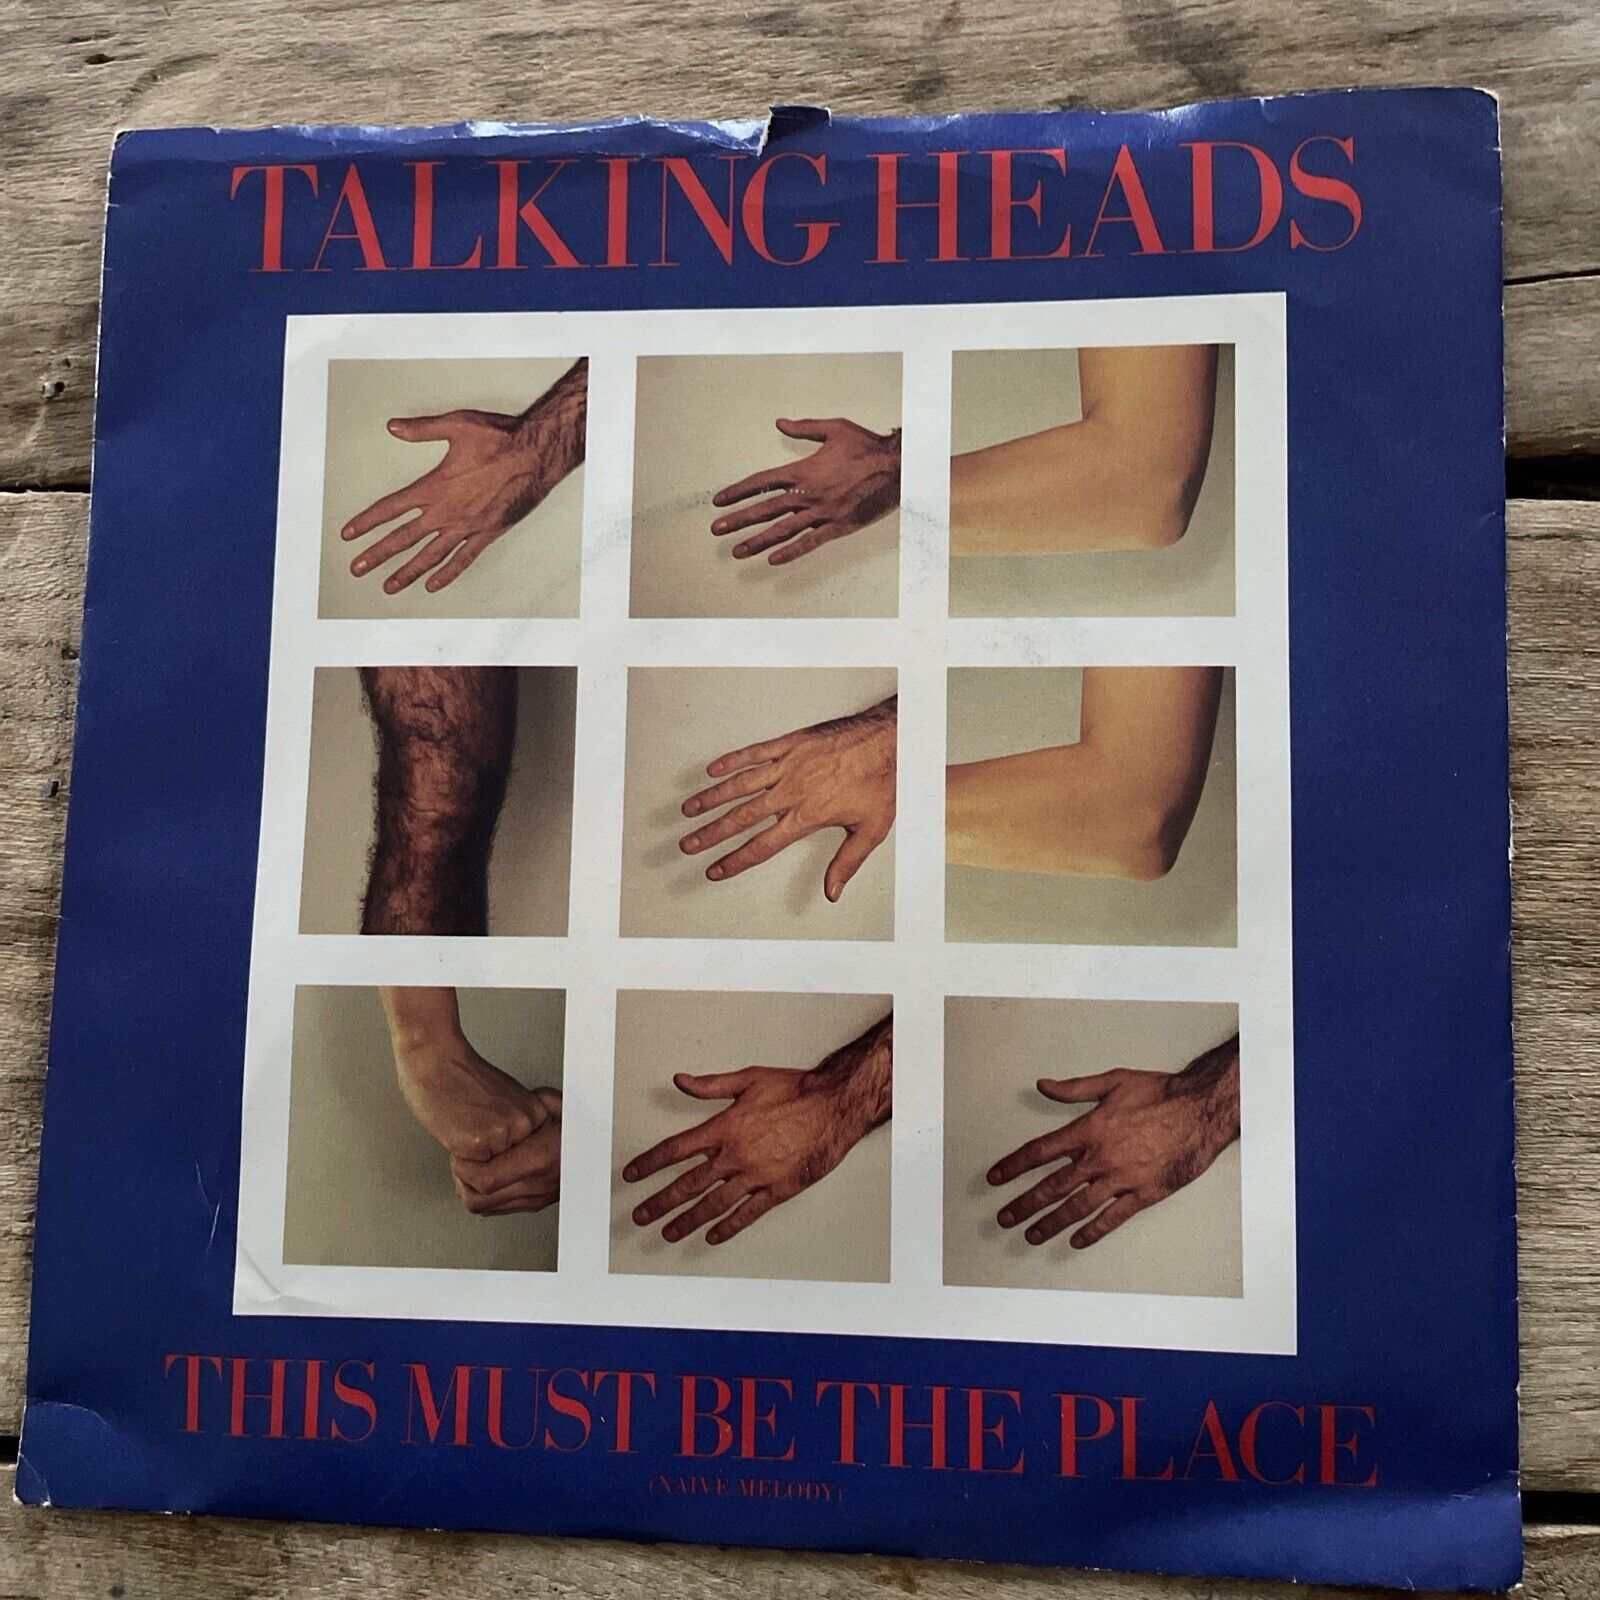 Talking Heads 45 Record in Picture Sleeve This Must be the Place / Moon Rocks NM